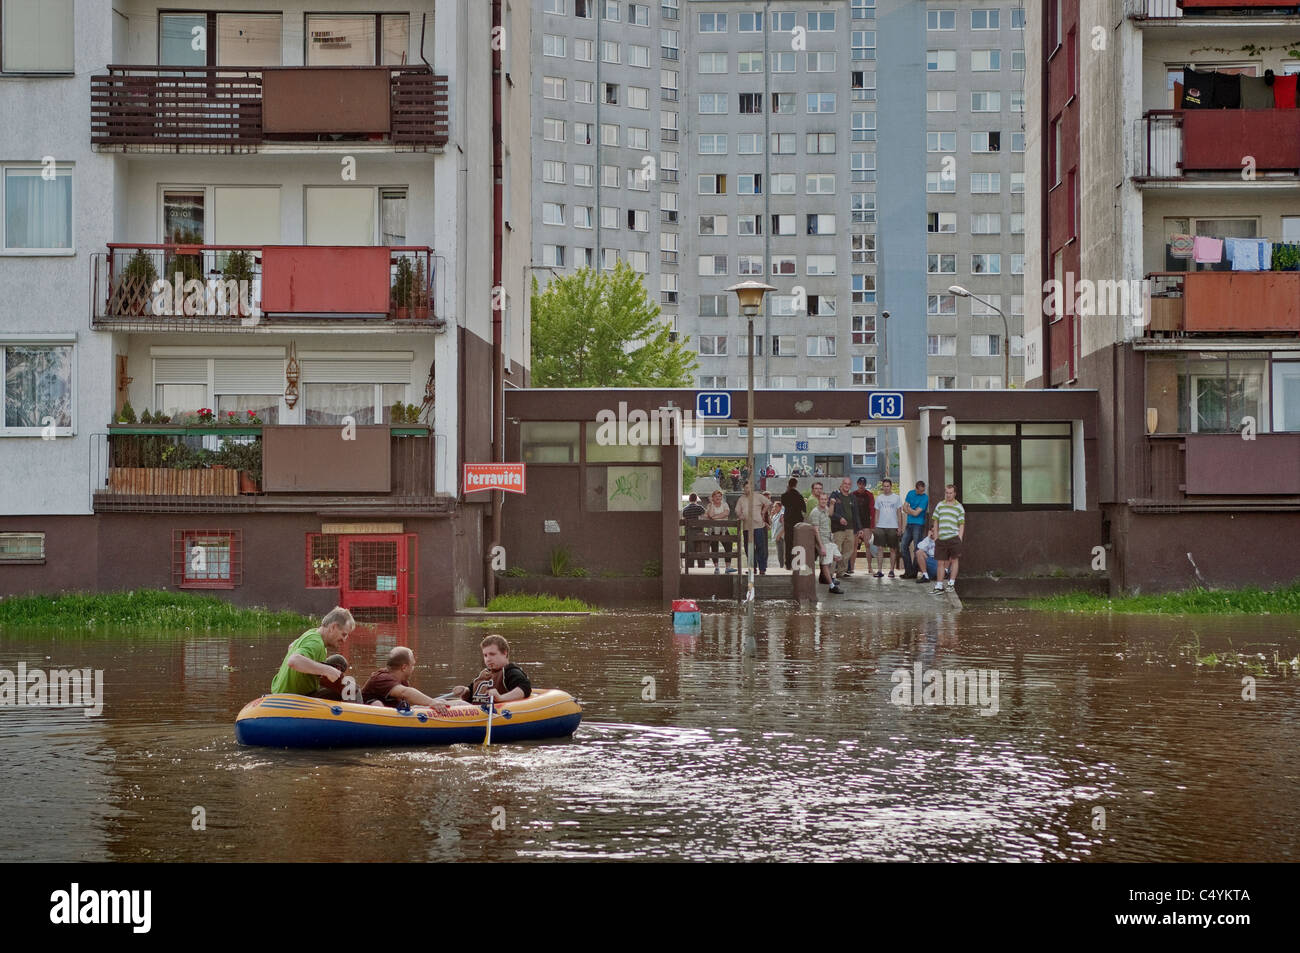 Men in pontoon paddling across flooded area near entrance to apartment building, 2010 flood at Kozanow area of Wrocław, Poland Stock Photo